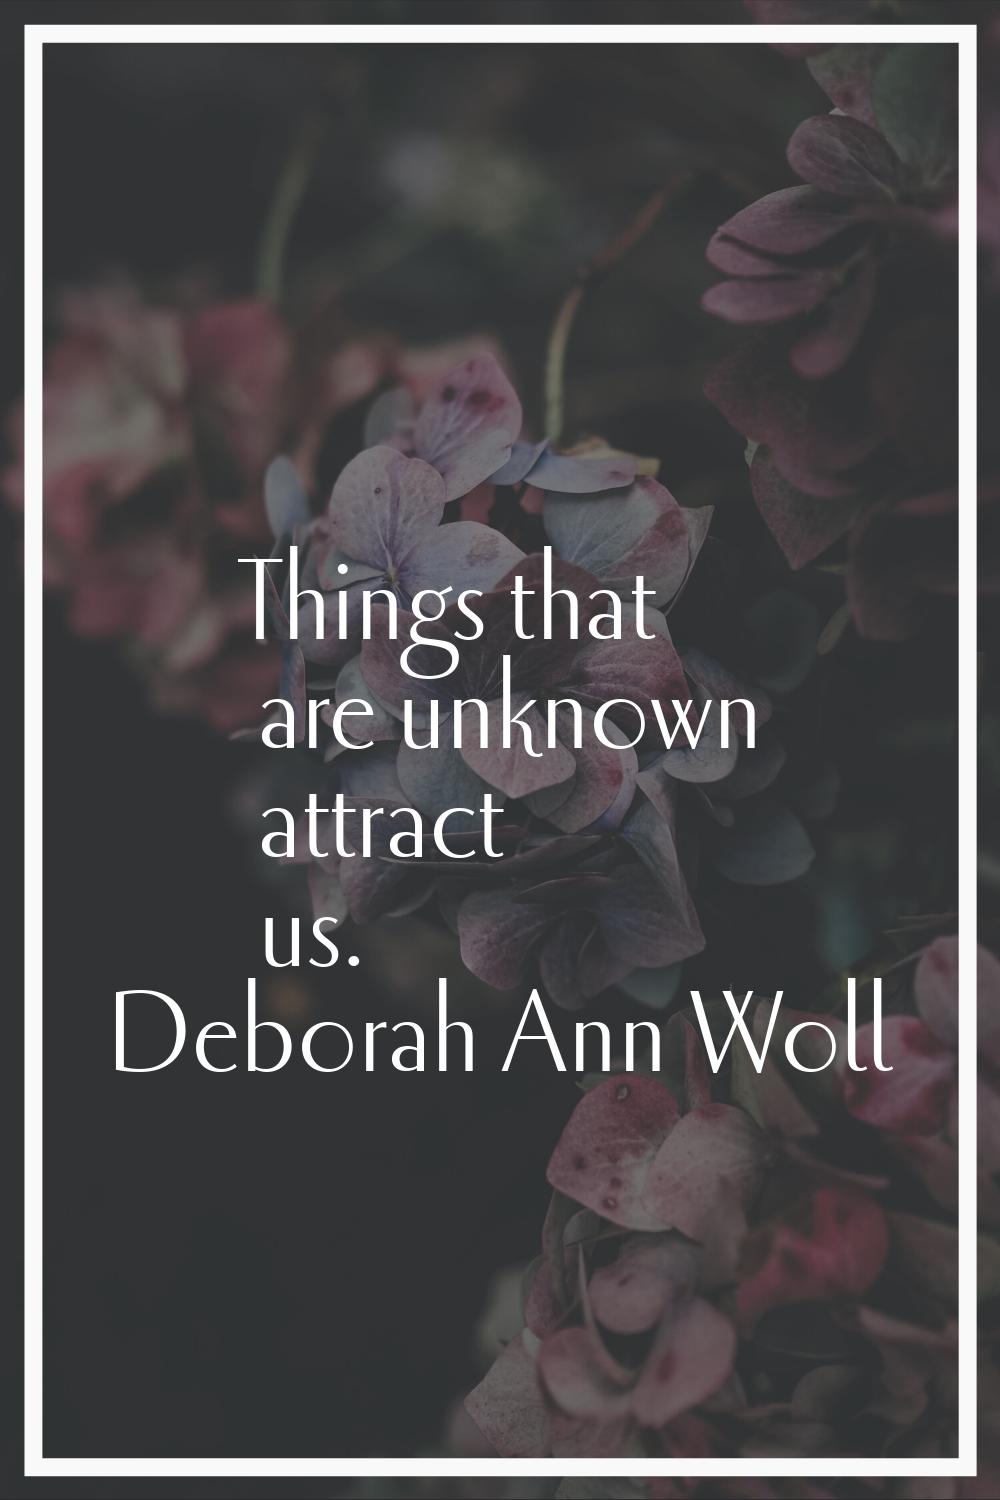 Things that are unknown attract us.